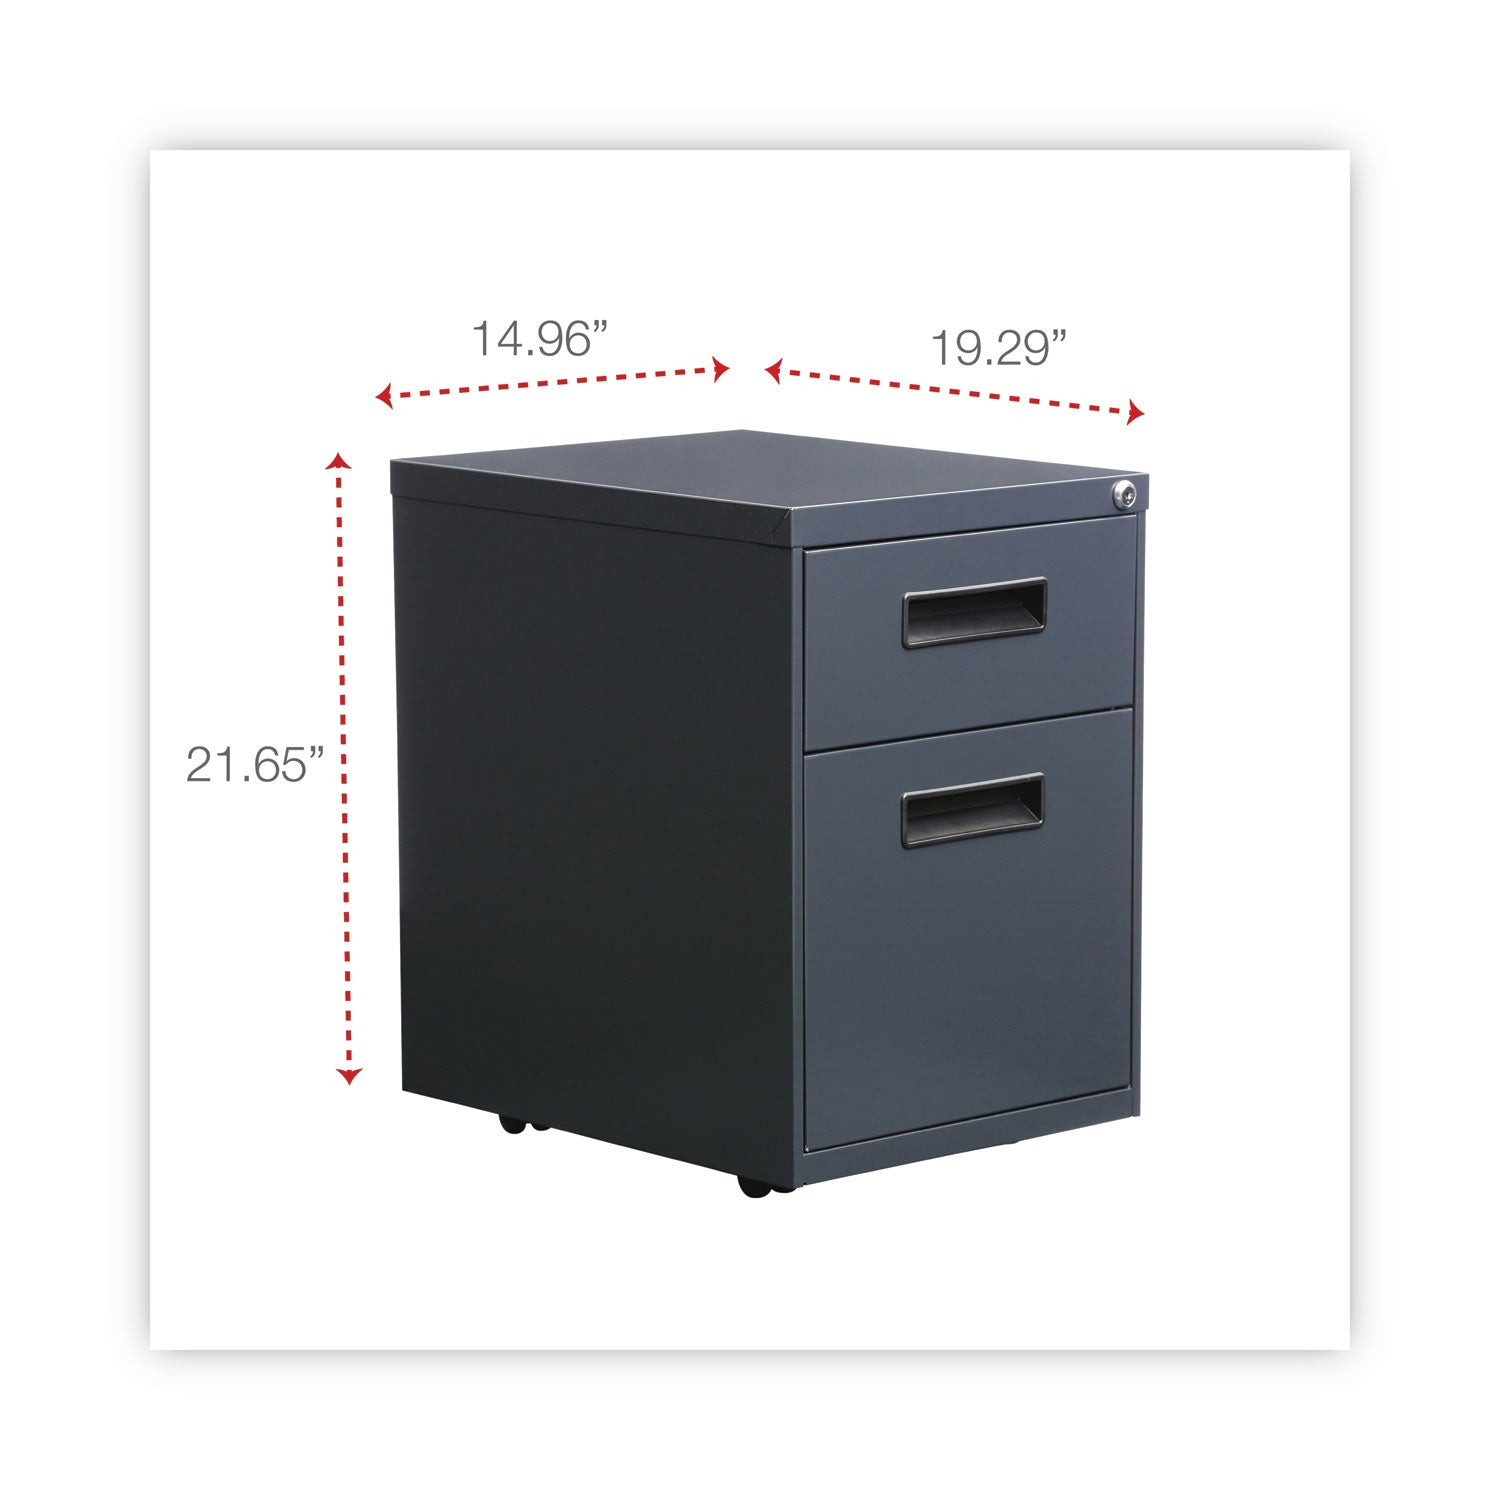 file-pedestal-left-or-right-2-drawers-box-file-legal-letter-charcoal-1496-x-1929-x-2165_alepabfch - 3